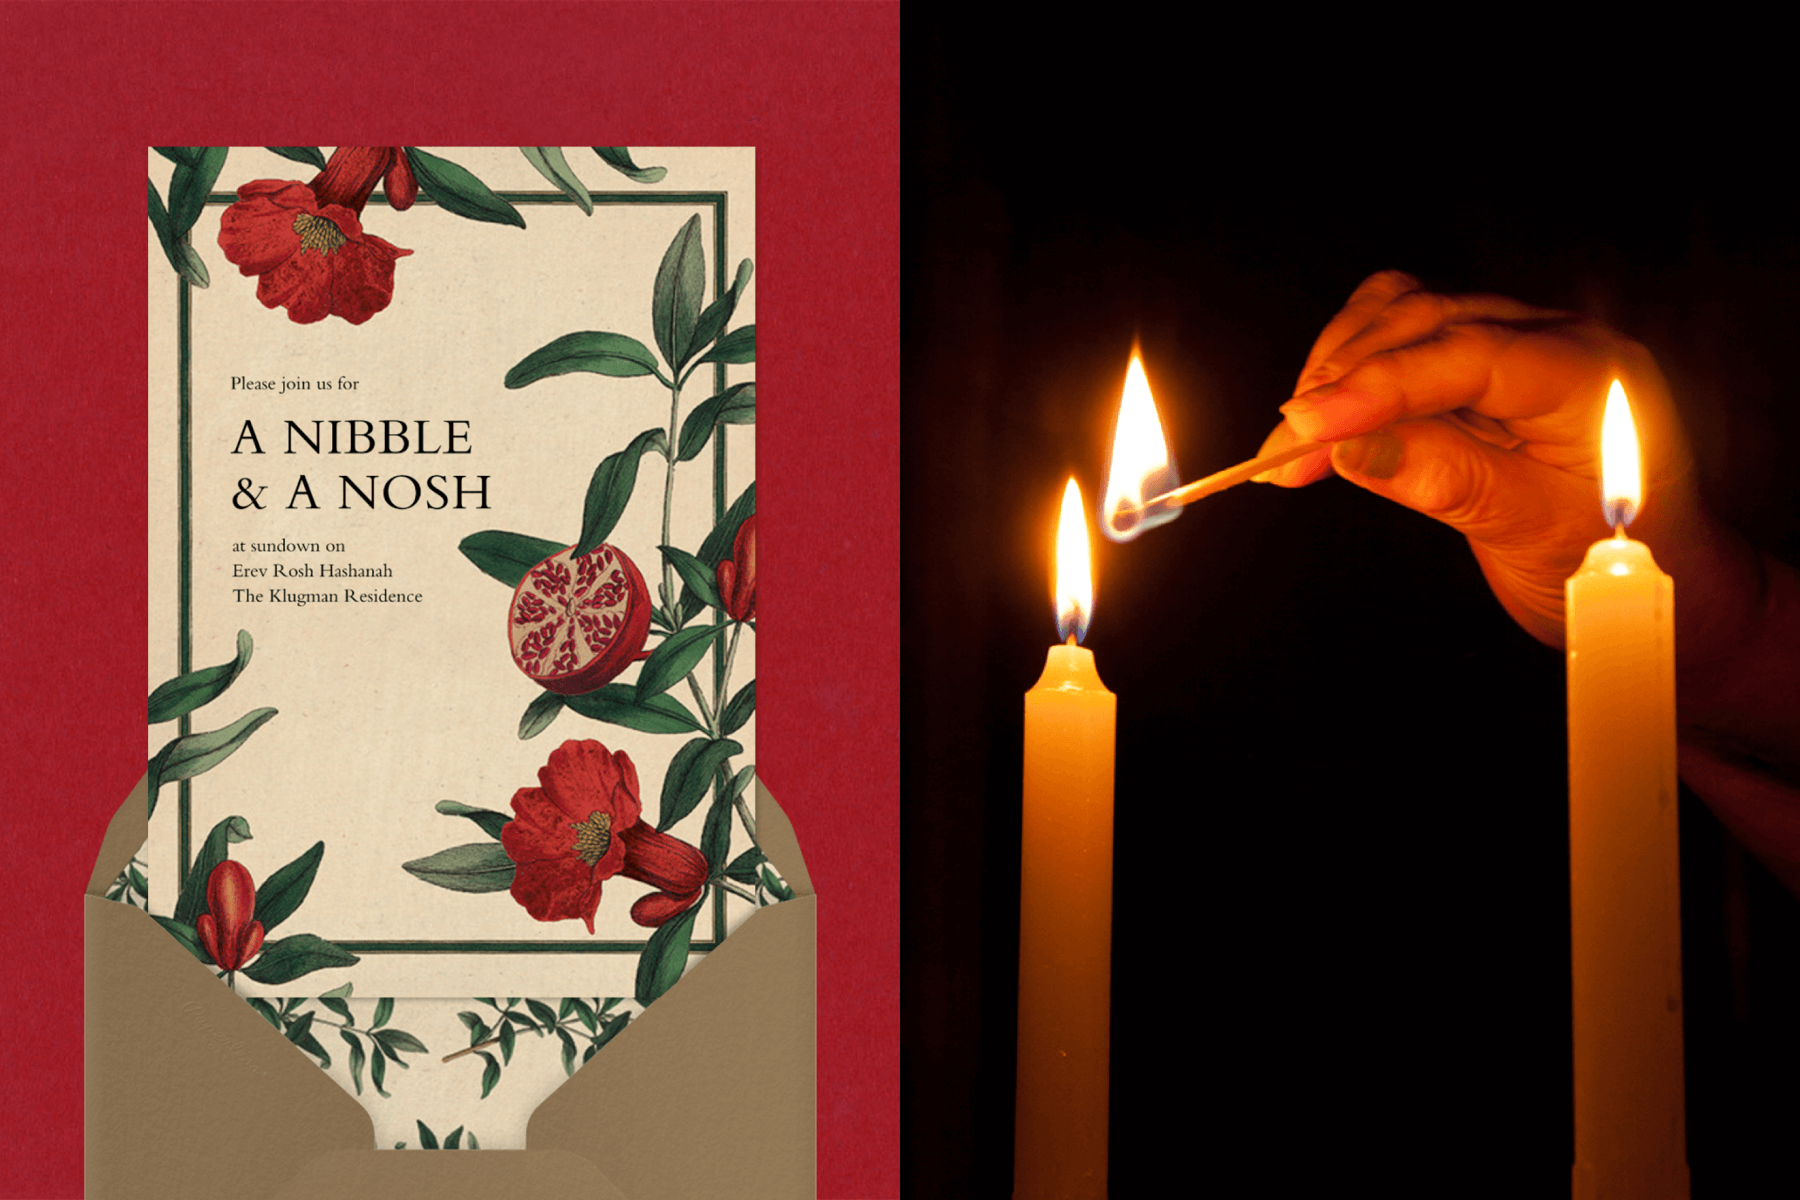 Left: A Rosh Hashanah invitation with a border of red flowers and pomegranates. Right: A hand lights tapered candles in darkness.